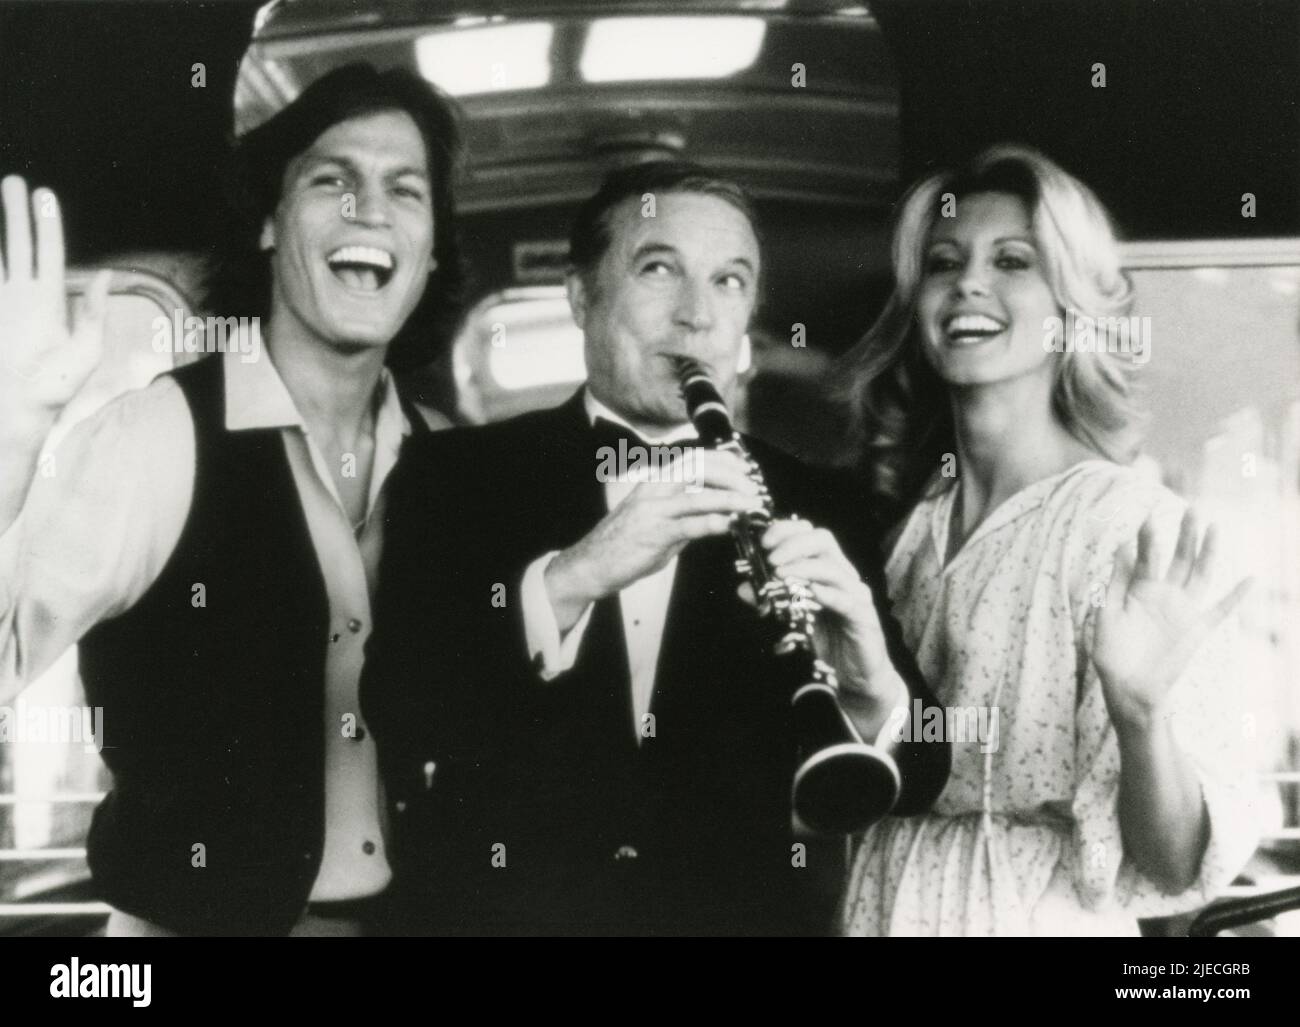 Actors Michael Beck and Gene Kelly, and actress Olivia Newton-John in the movie Xanadu, USA 1980 Stock Photo